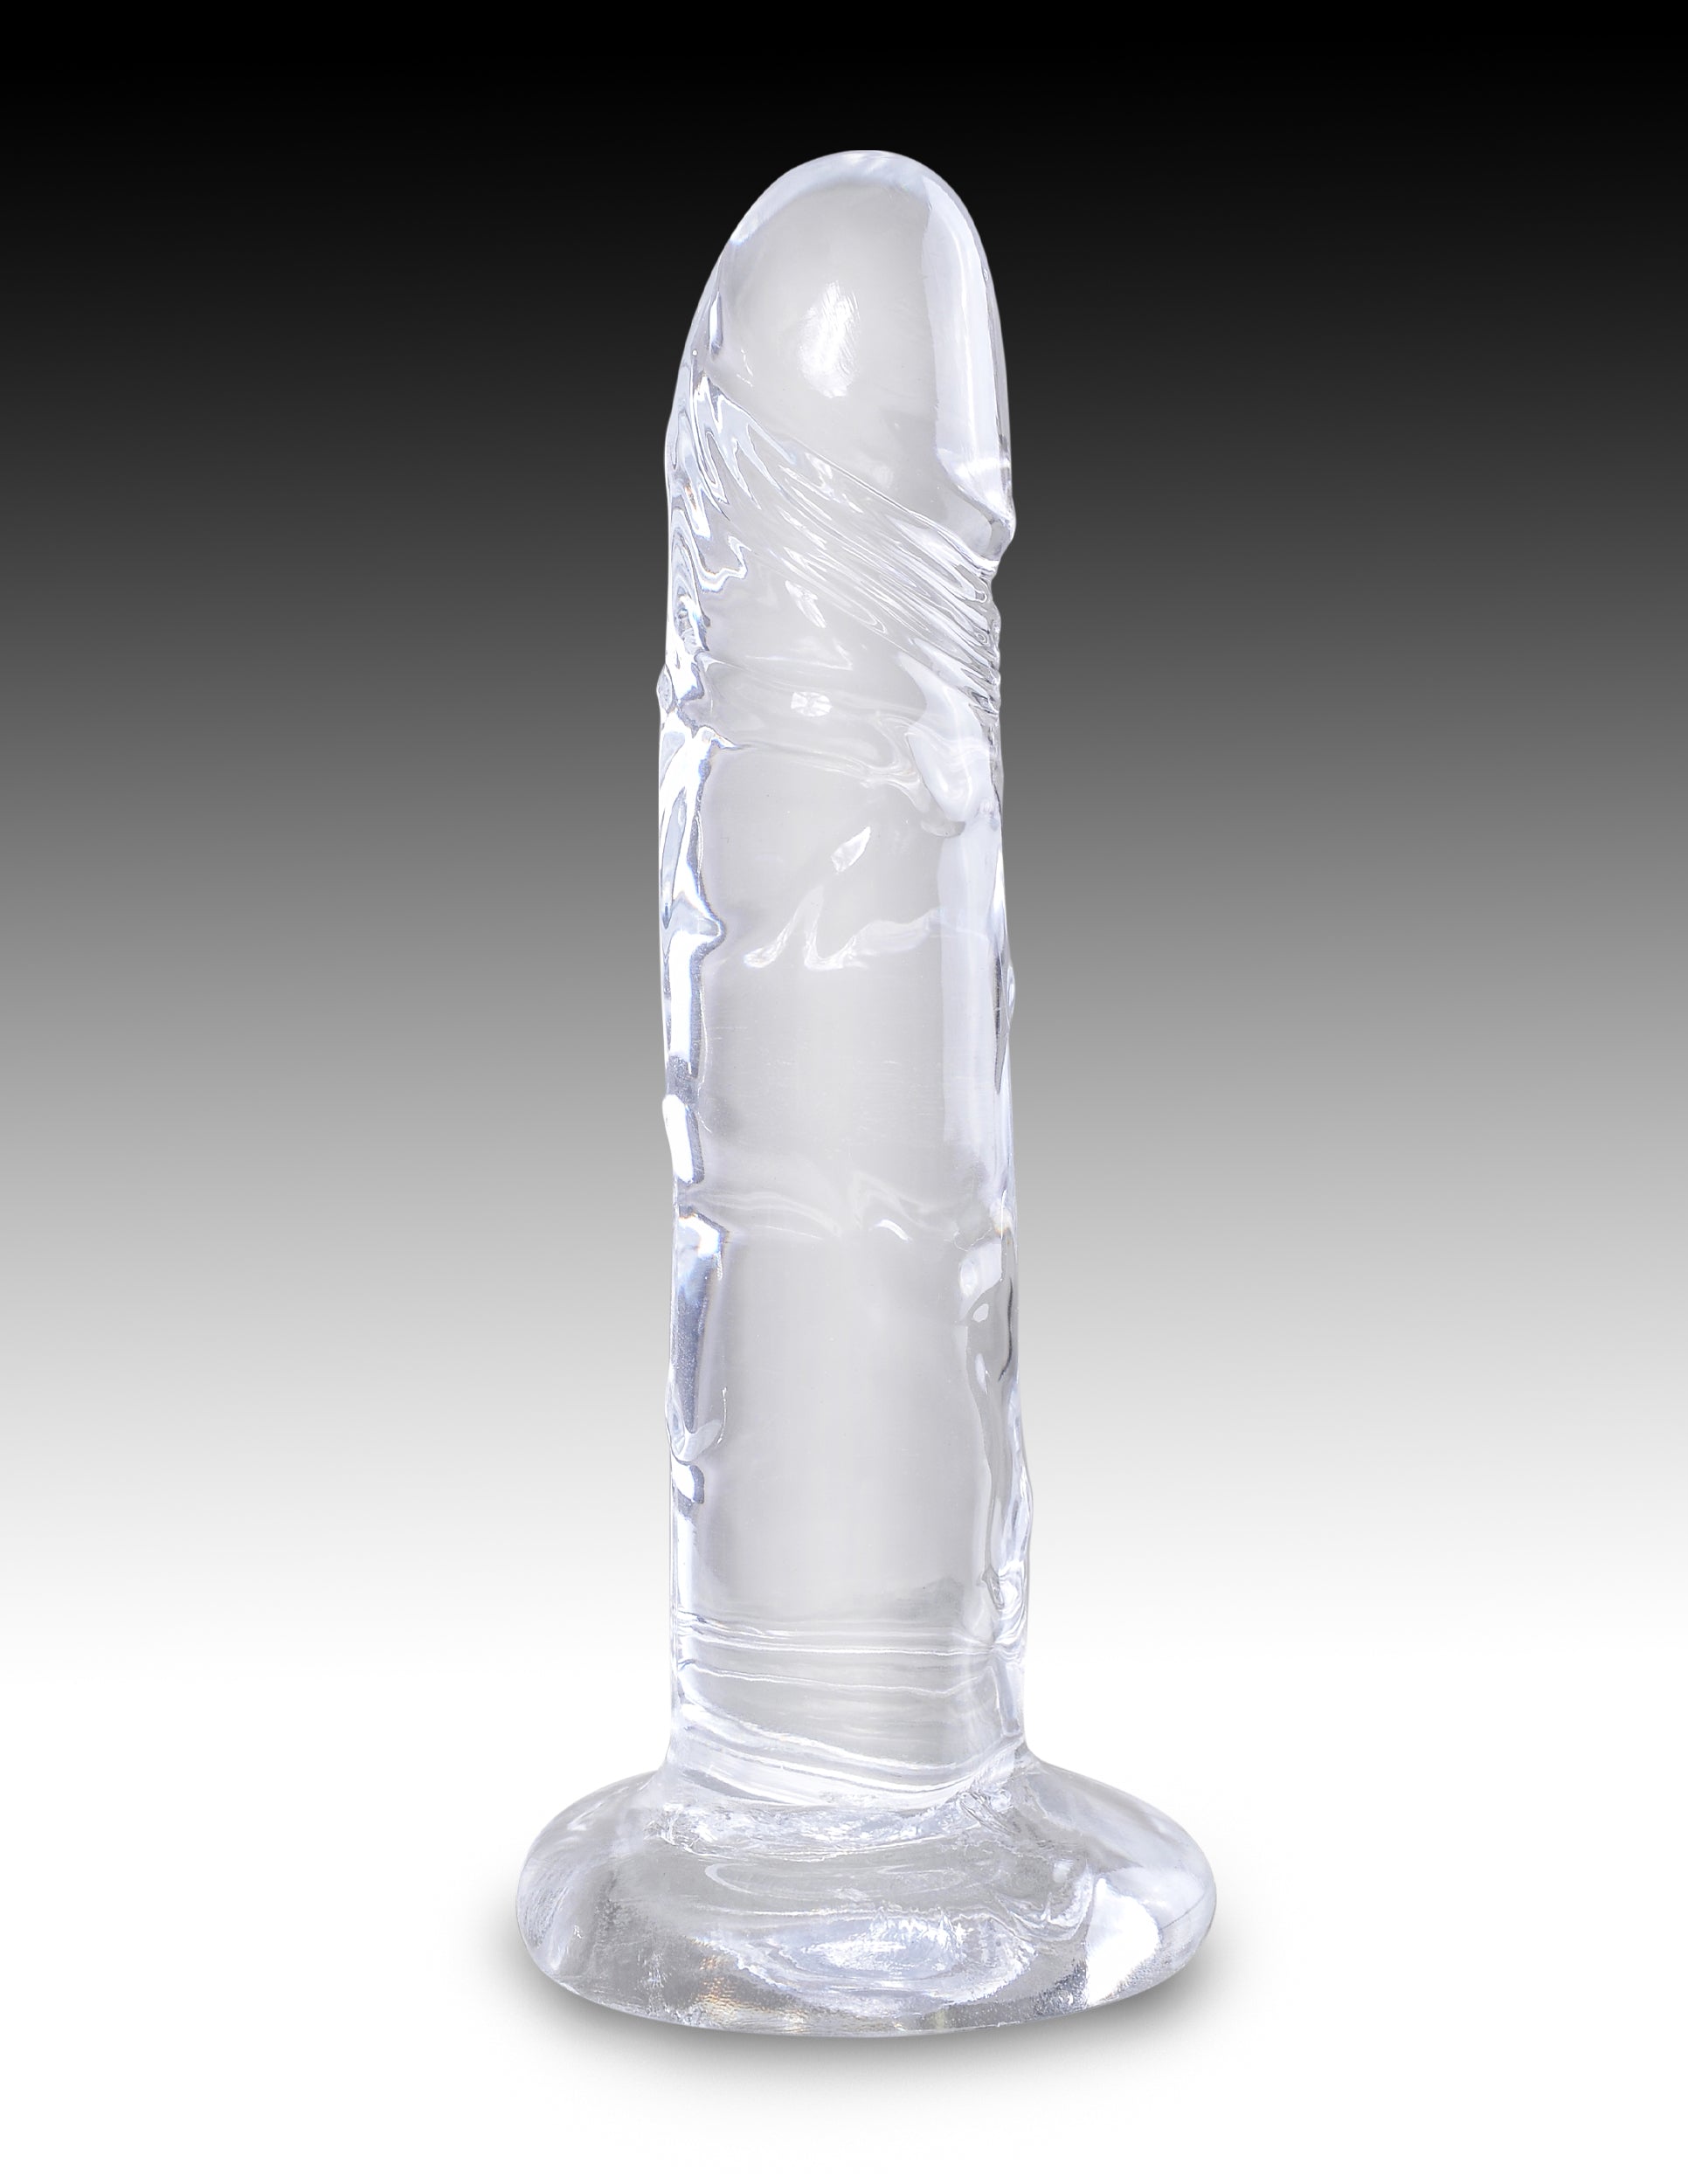 King Cock Clear Cock